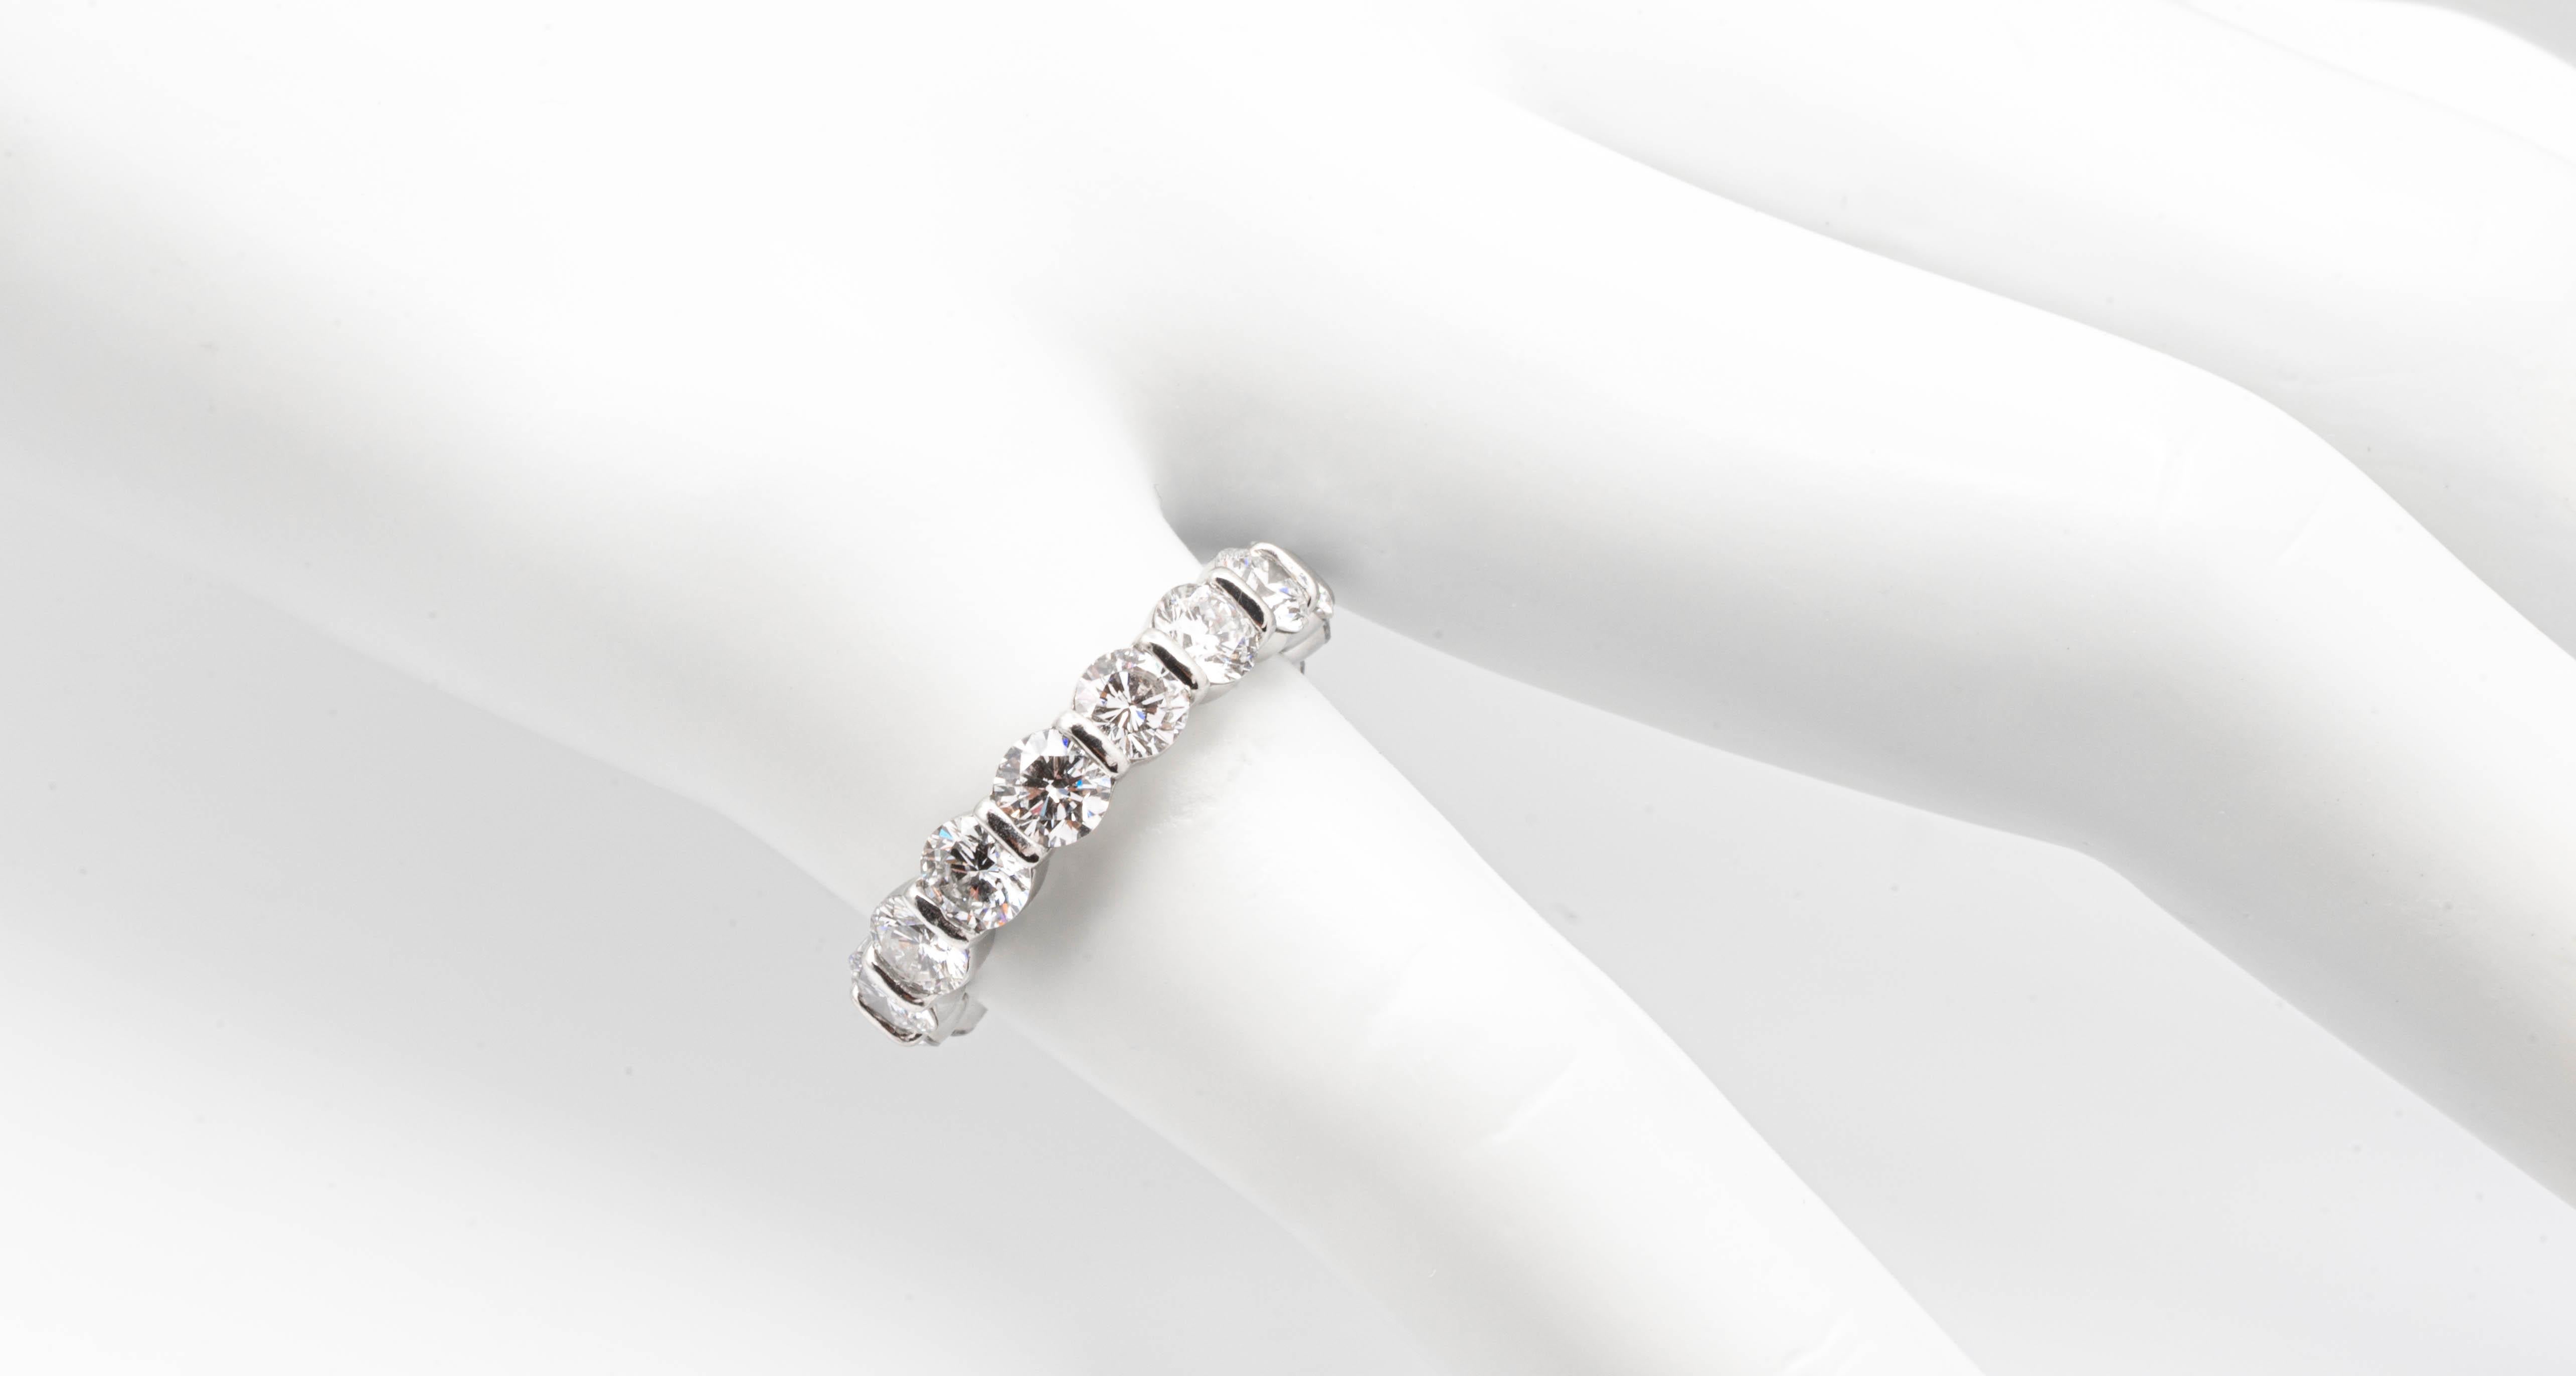 Contemporary Tiffany & Co. Platinum 3.20 Ct Diamond Eternity Ring Bar Set with Round Cuts 4mm